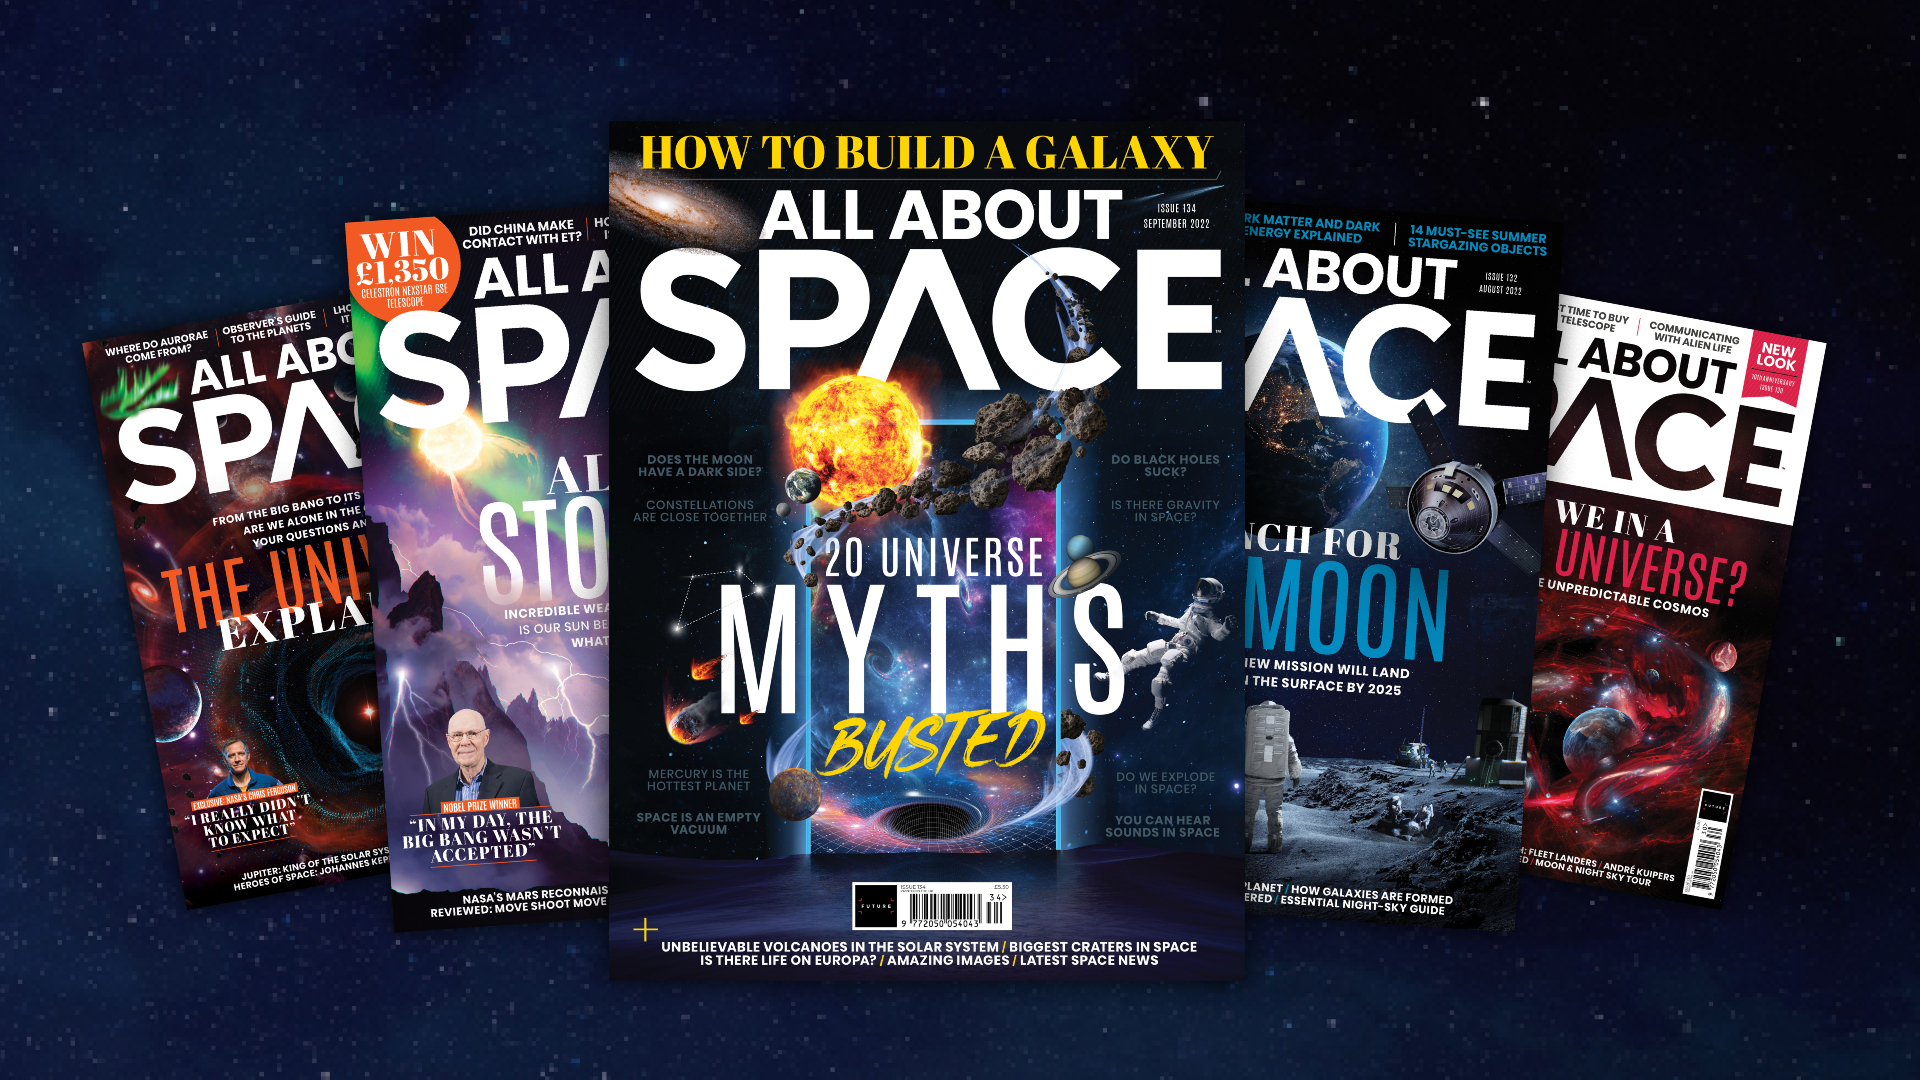 Explore common space misconceptions with All About Space magazine